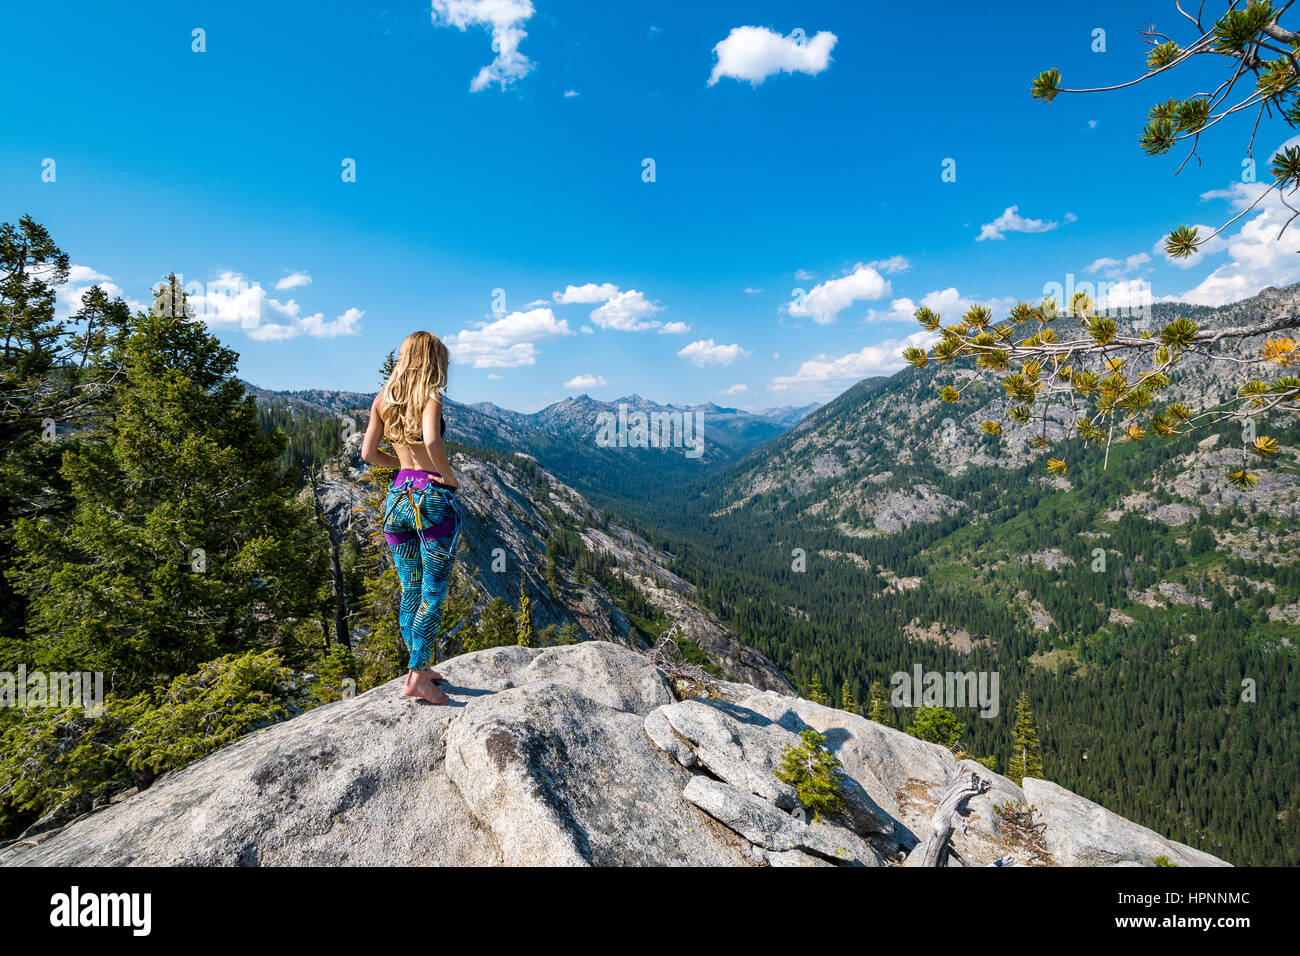 Noelle Synder climbs the Memorial Route on Slick Rock Stock Photo